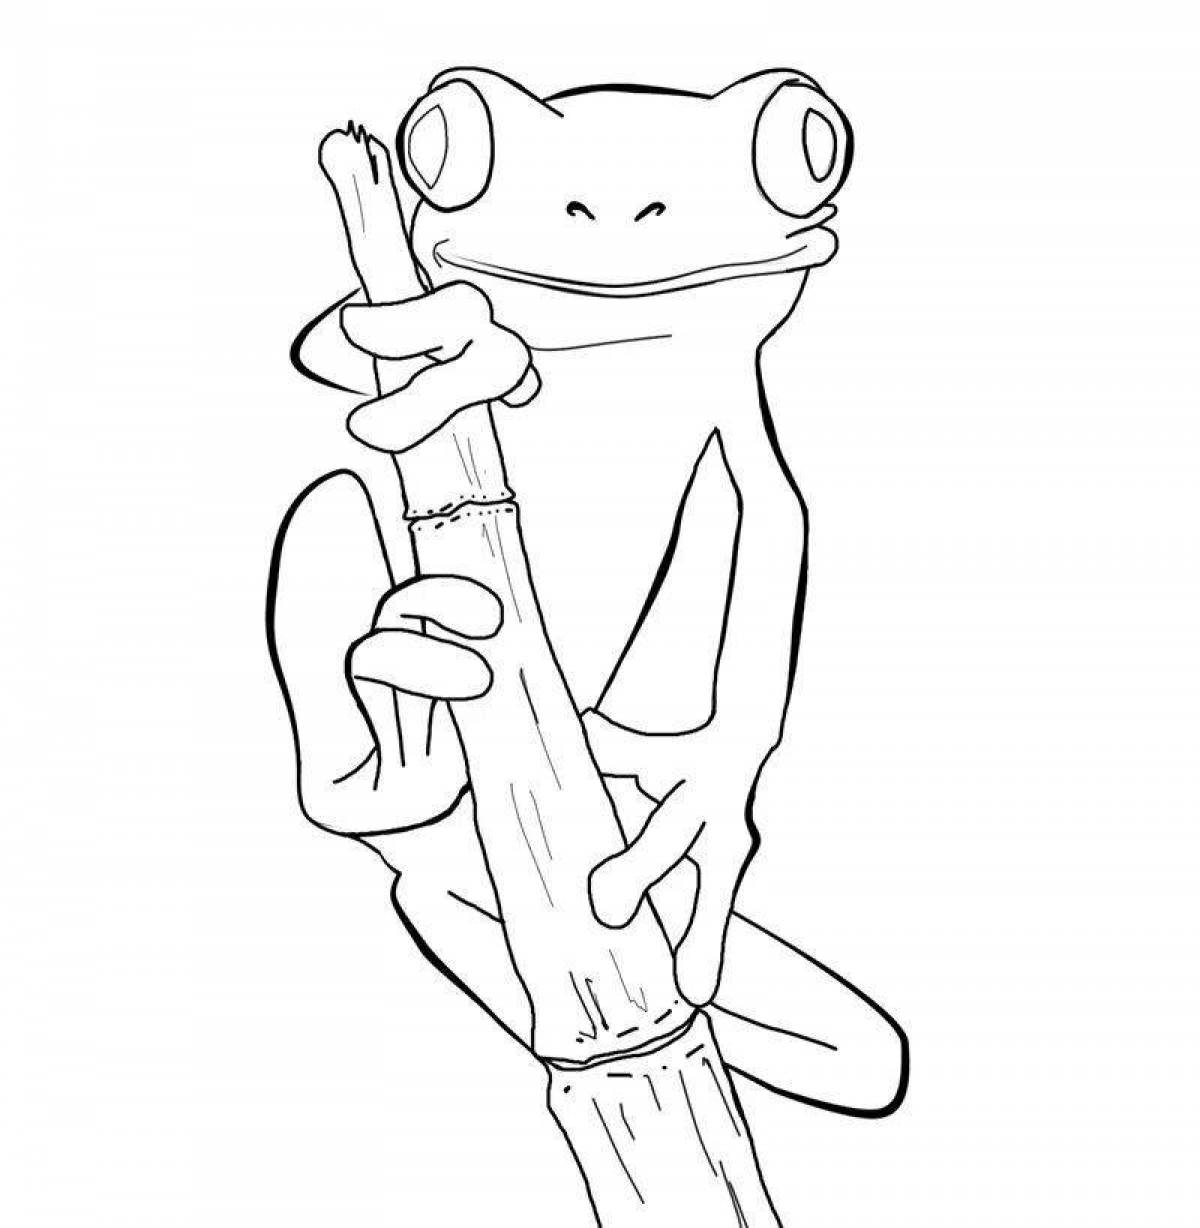 Amazing cute frog coloring book